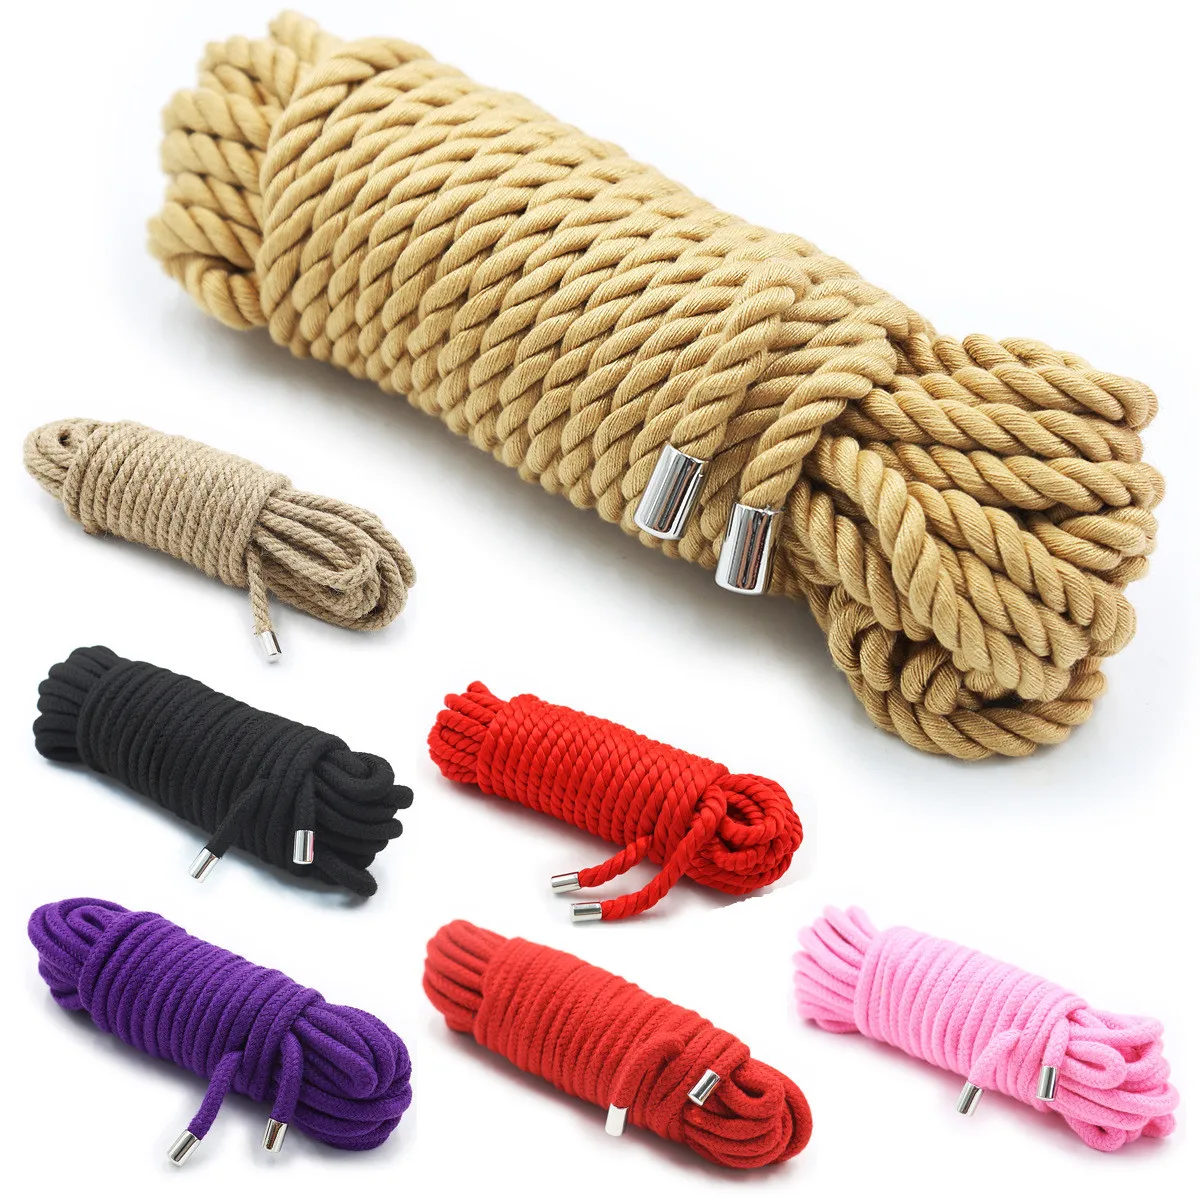 High Quality Japanese Bondage Rope Erotic Shibari Accessory for Binding Binder Restraint to Touch Tie Up Fun Slave Role Play